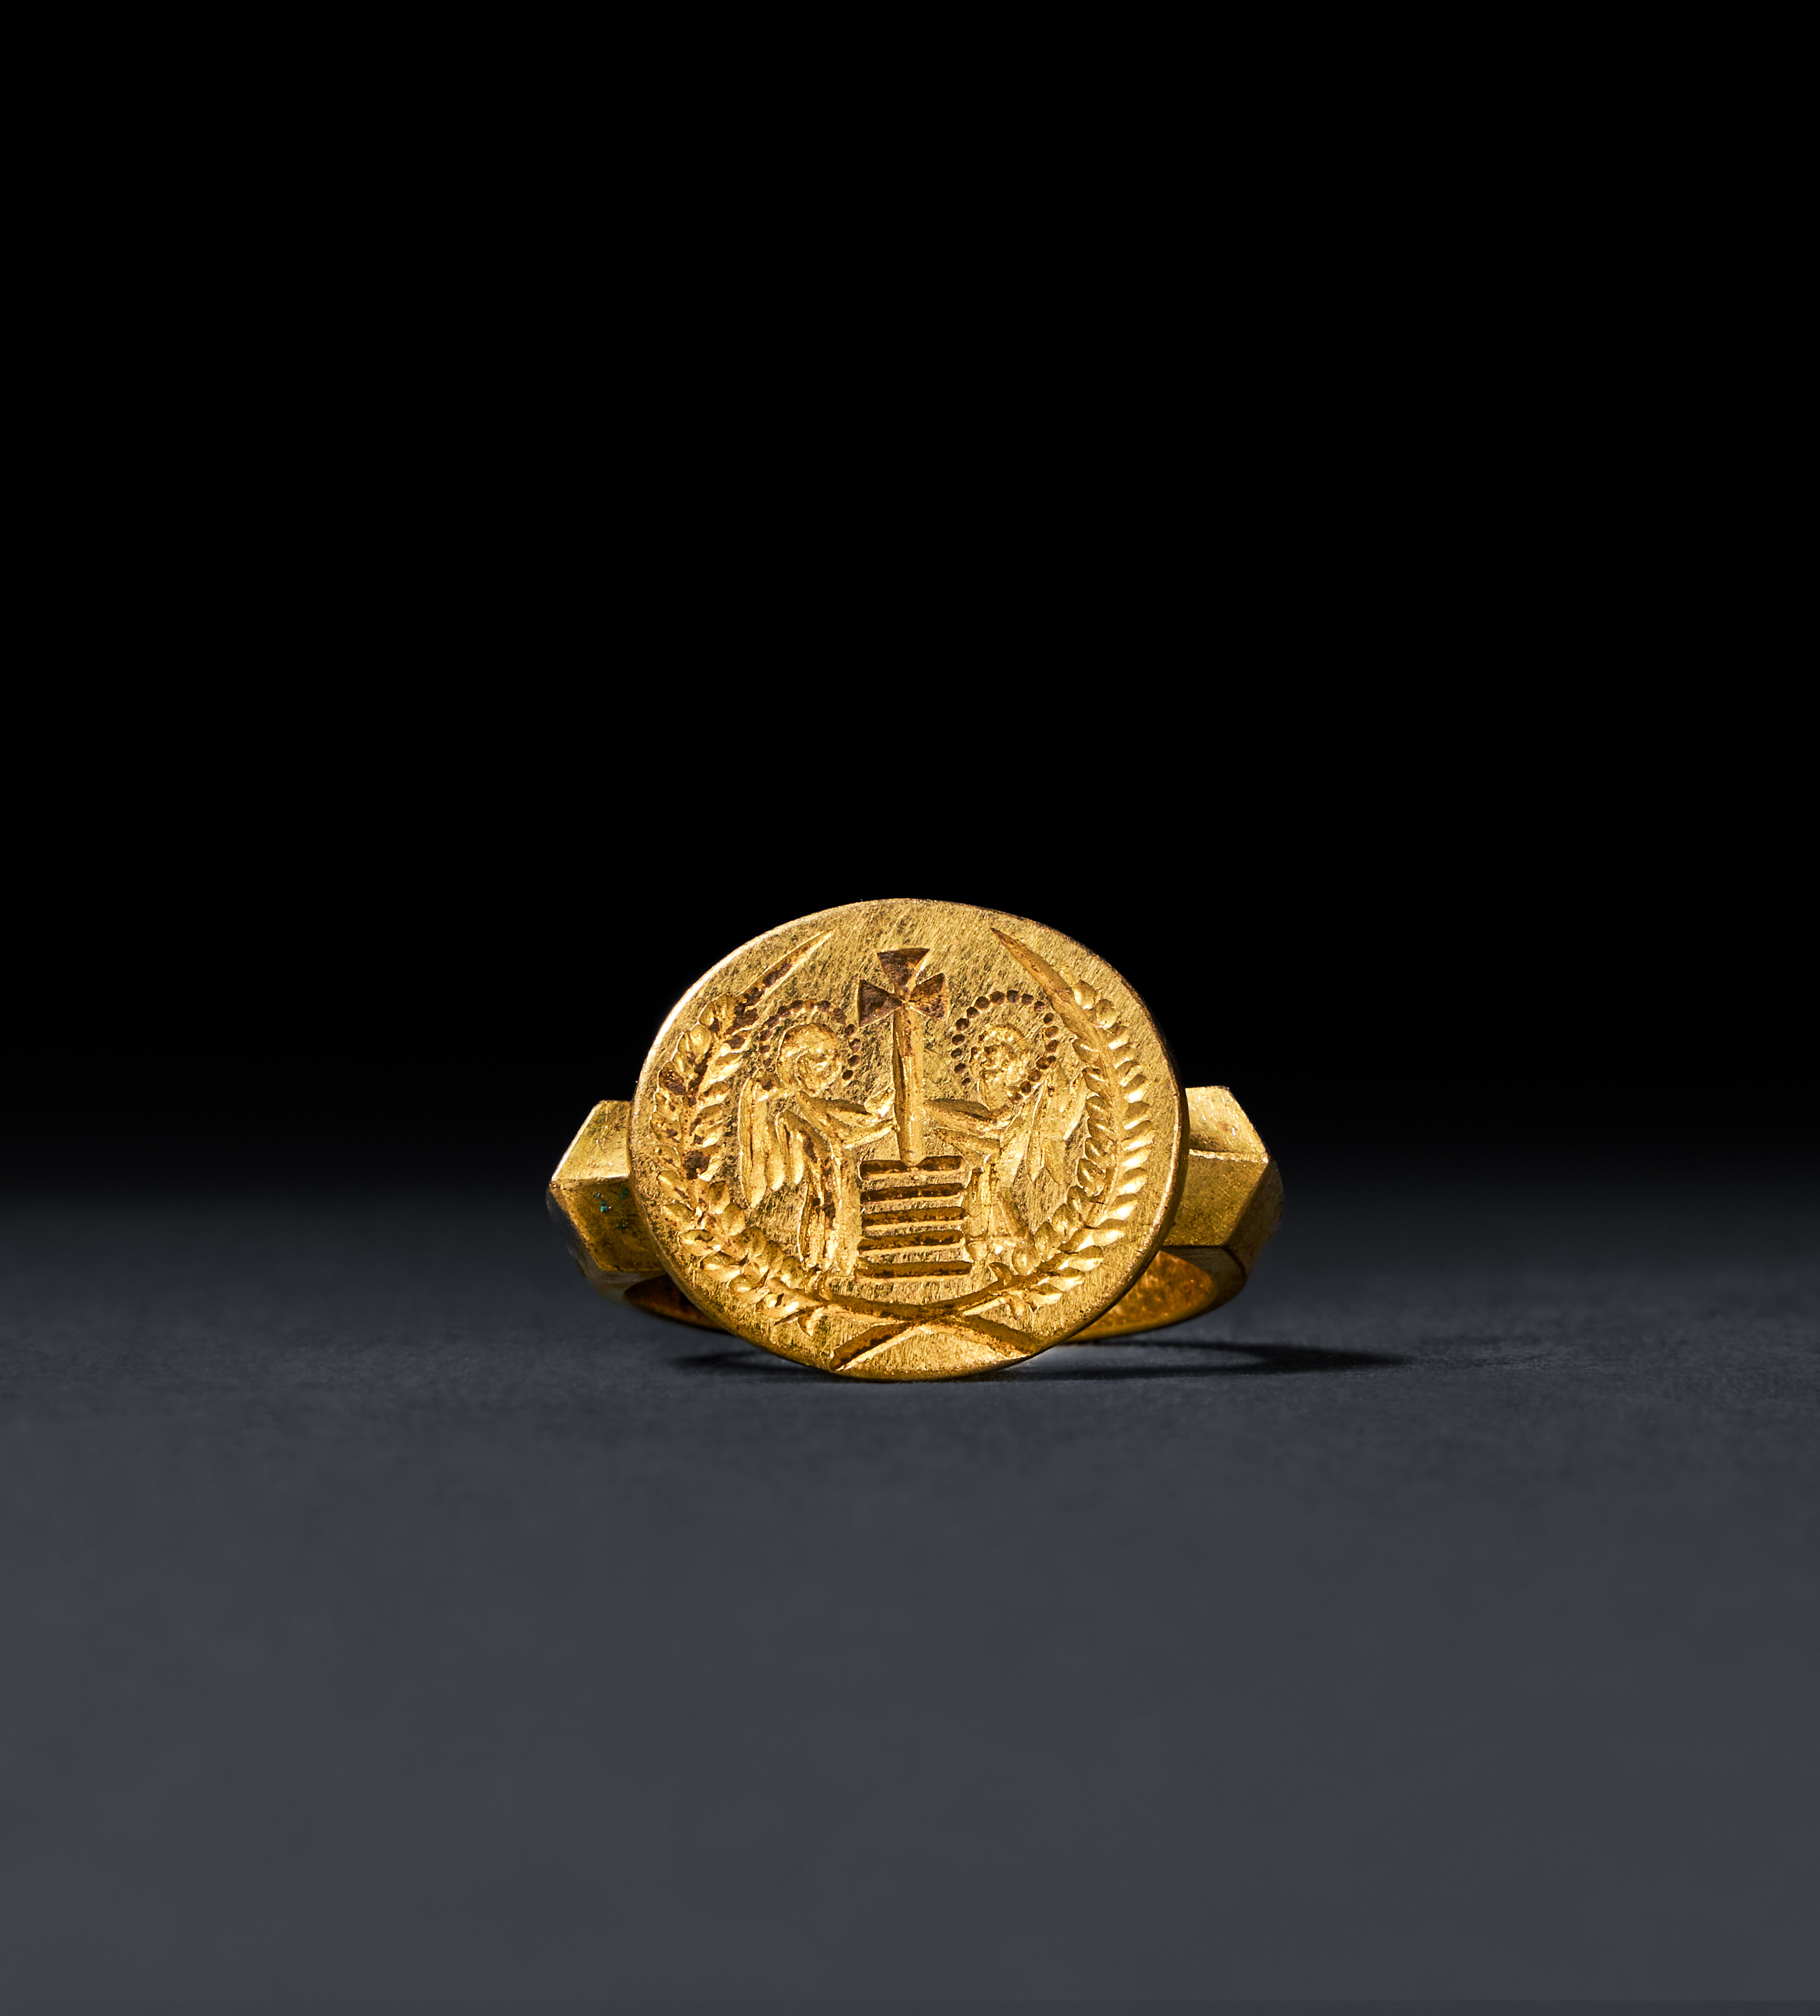 A BYZANTINE GOLD MARRIAGE FINGER RING CIRCA 6TH-7TH CENTURY A.D.